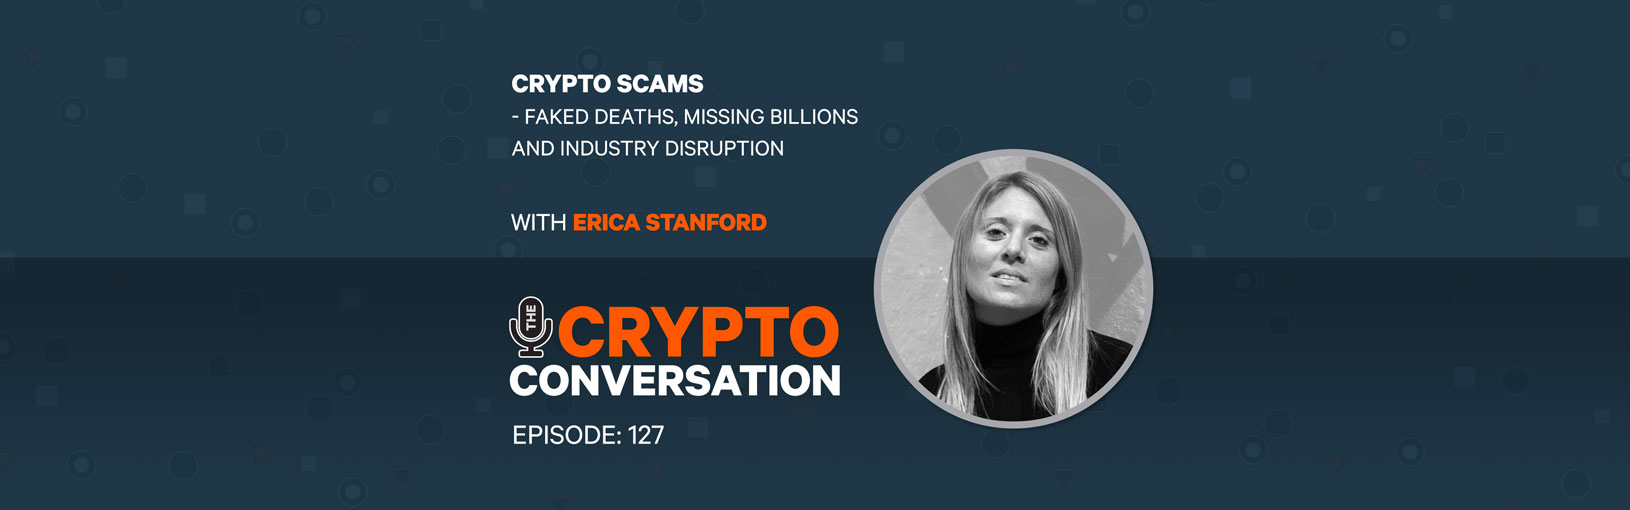 Crypto Scams – Faked Deaths, Missing Billions and Industry Disruption